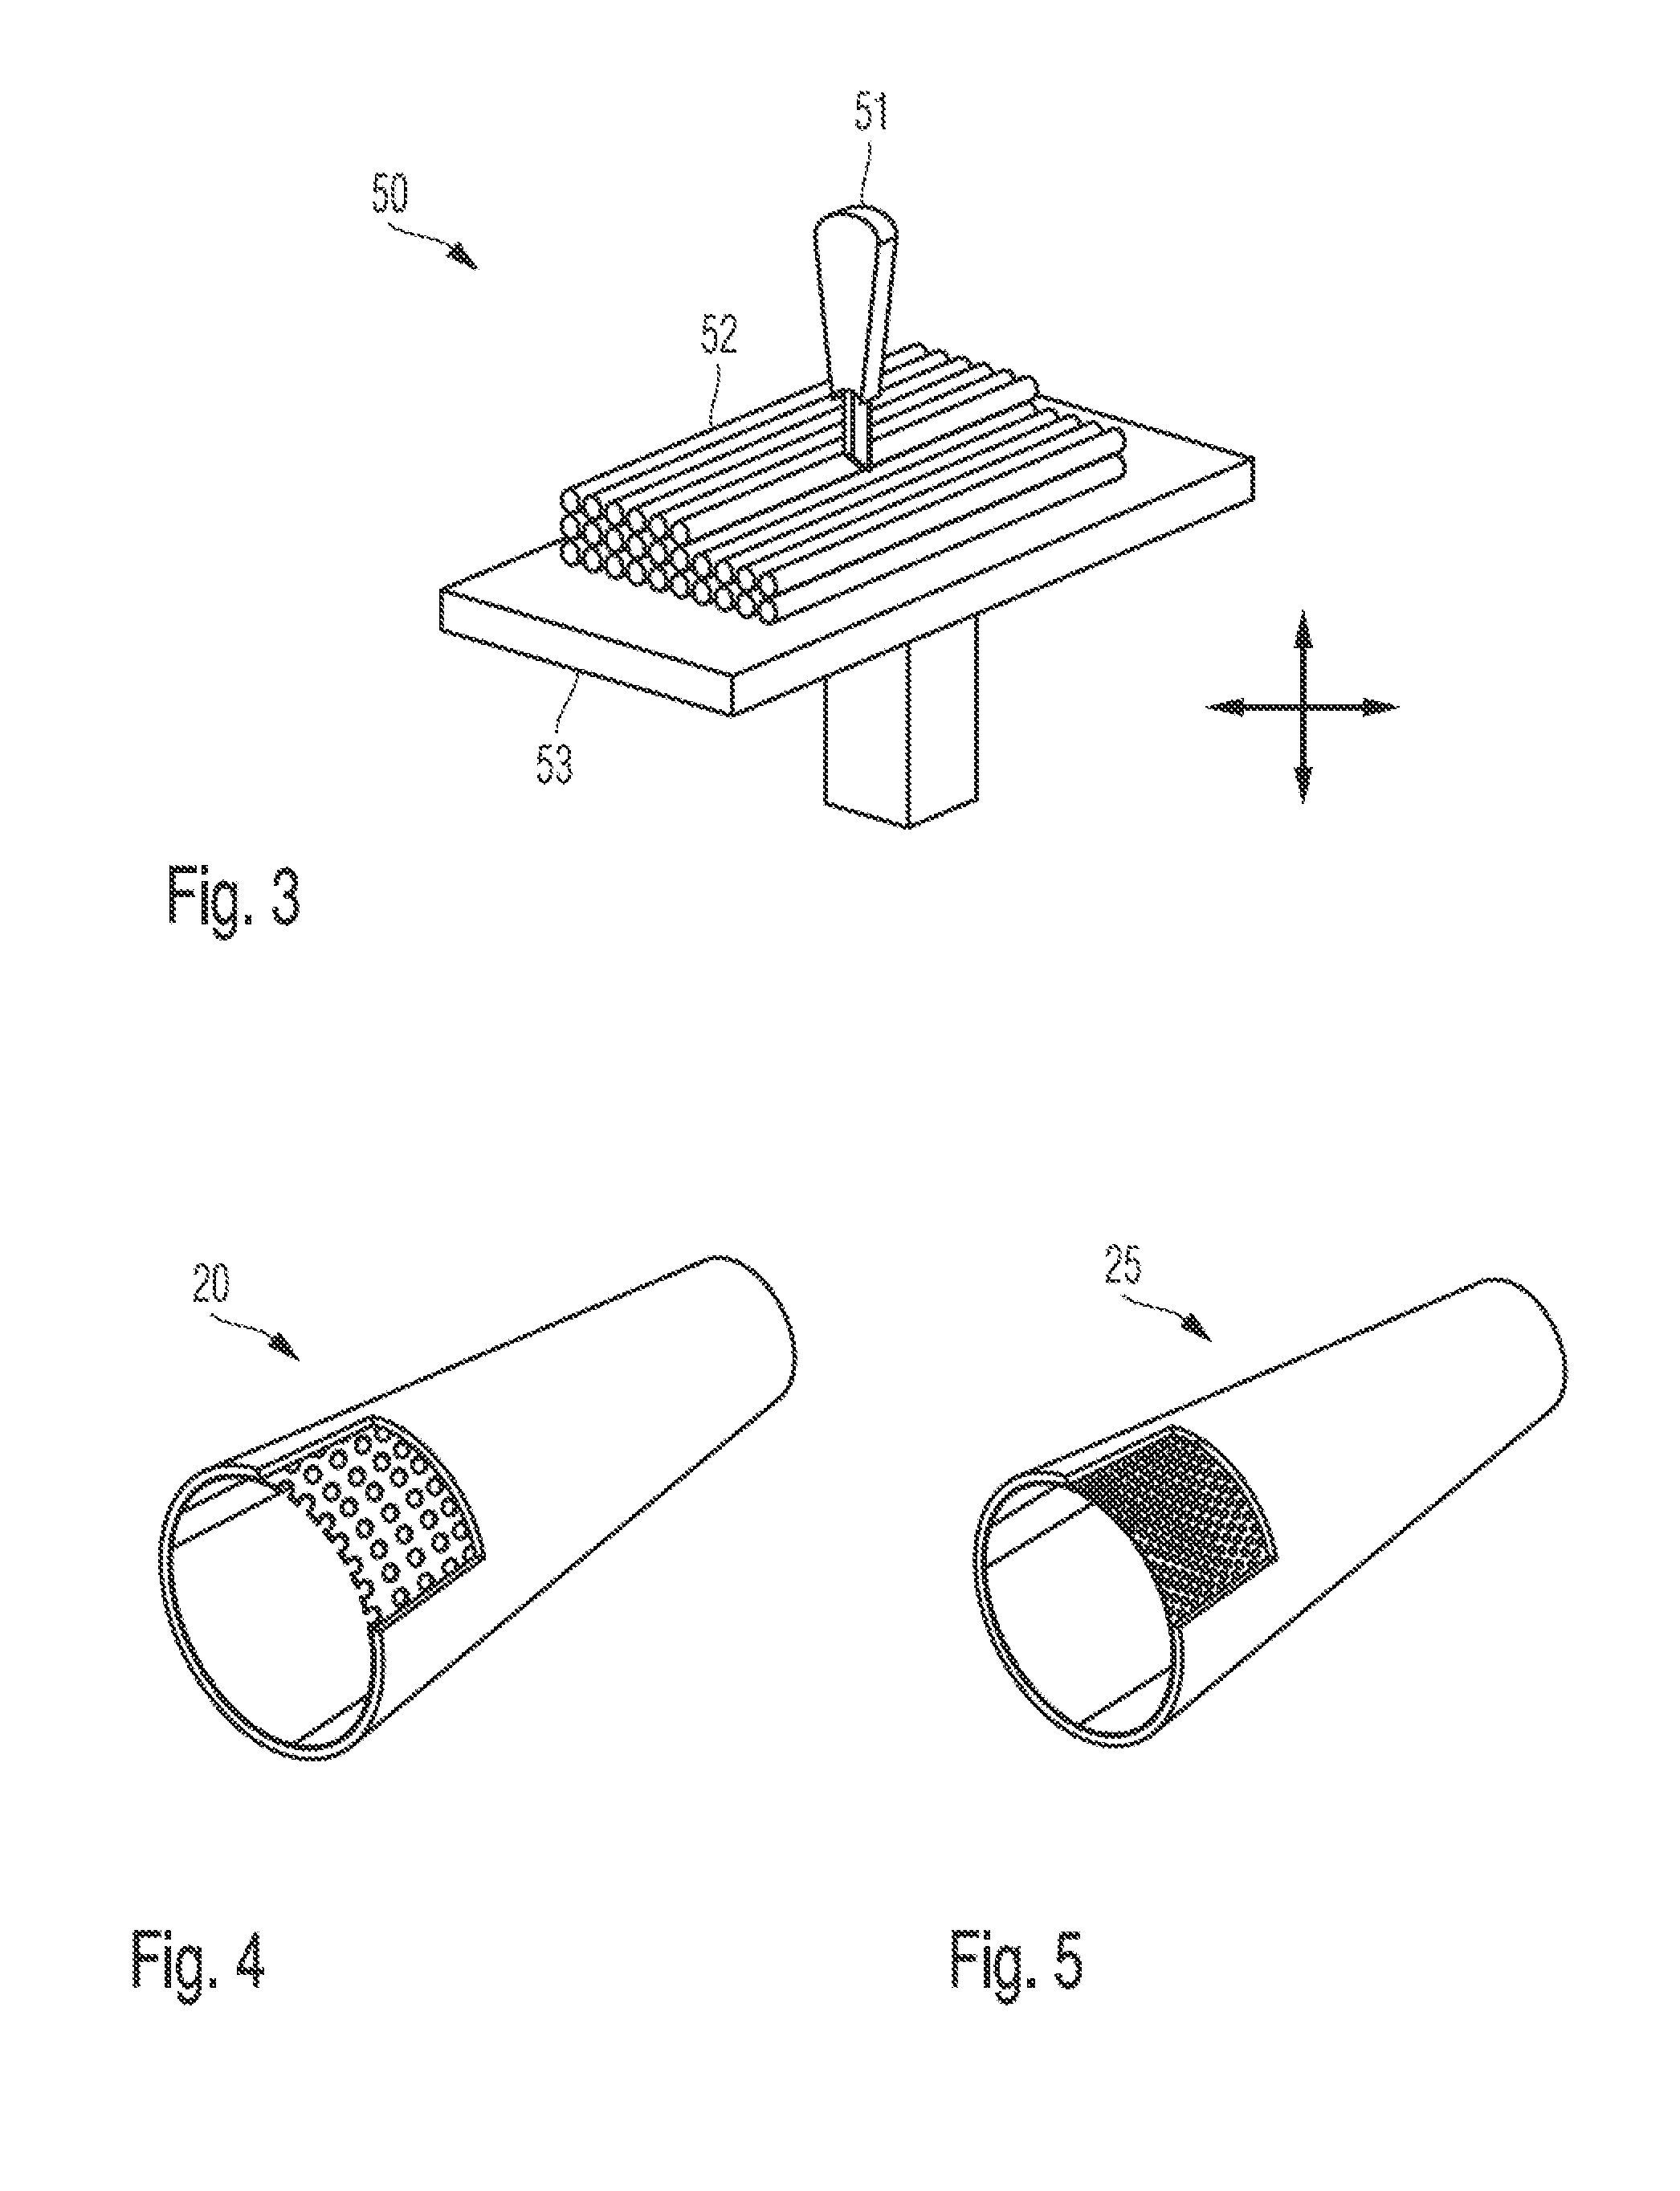 Manufacturing method and manufacturing tool for reinforced structural elements